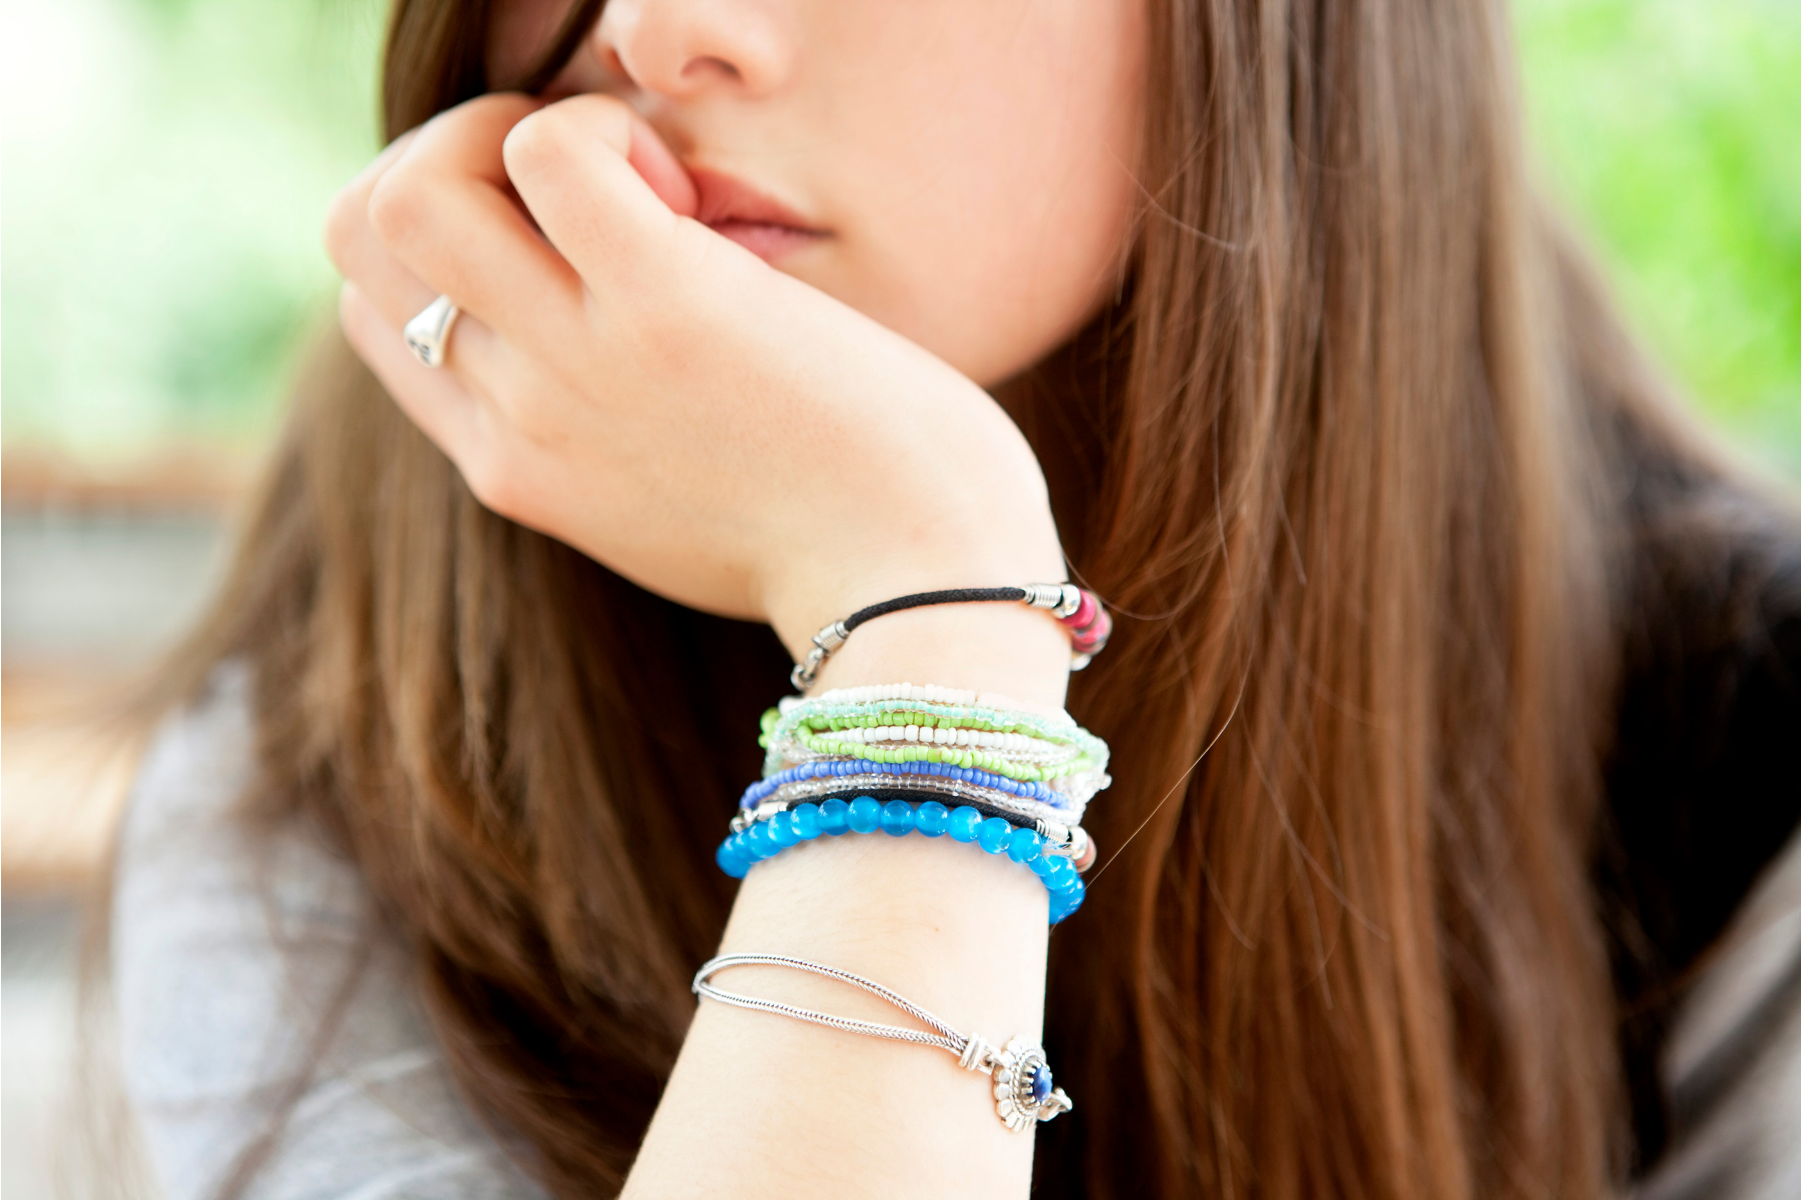 Tween or teen girl wearing bracelets sits bored with her chin in her hand.